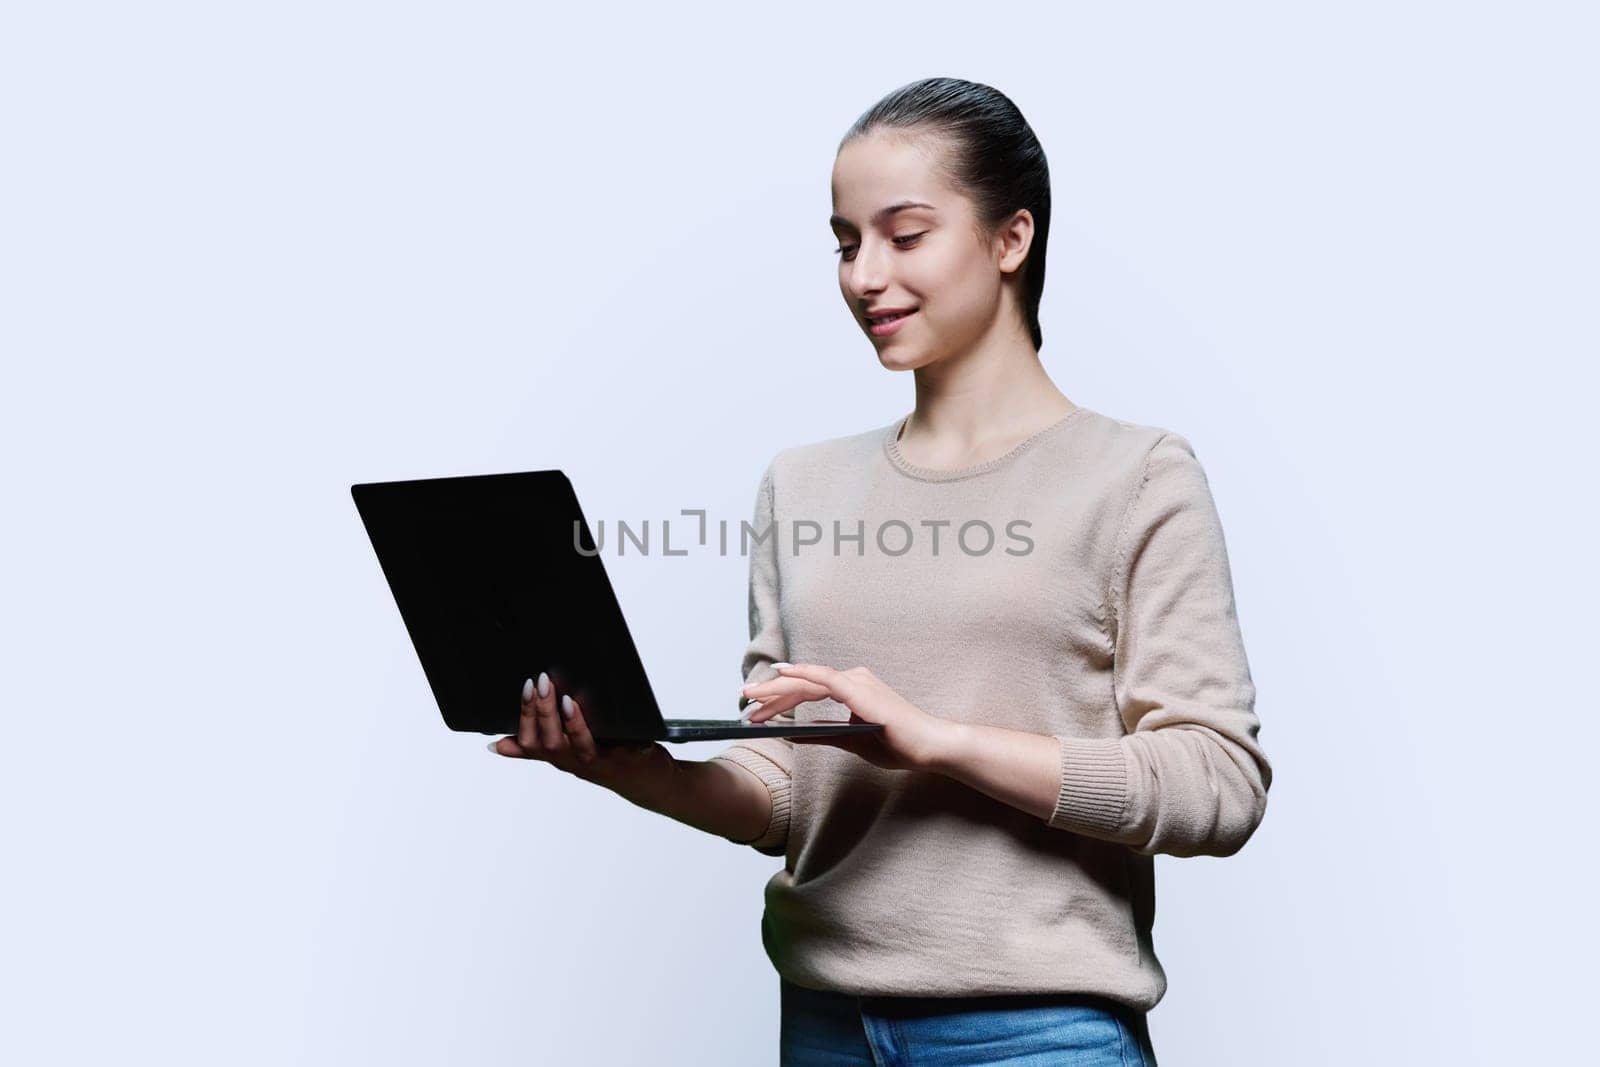 Teen girl high school student using laptop looking at computer screen, on white studio background. Technology, e-learning, education, adolescence, youth concept.